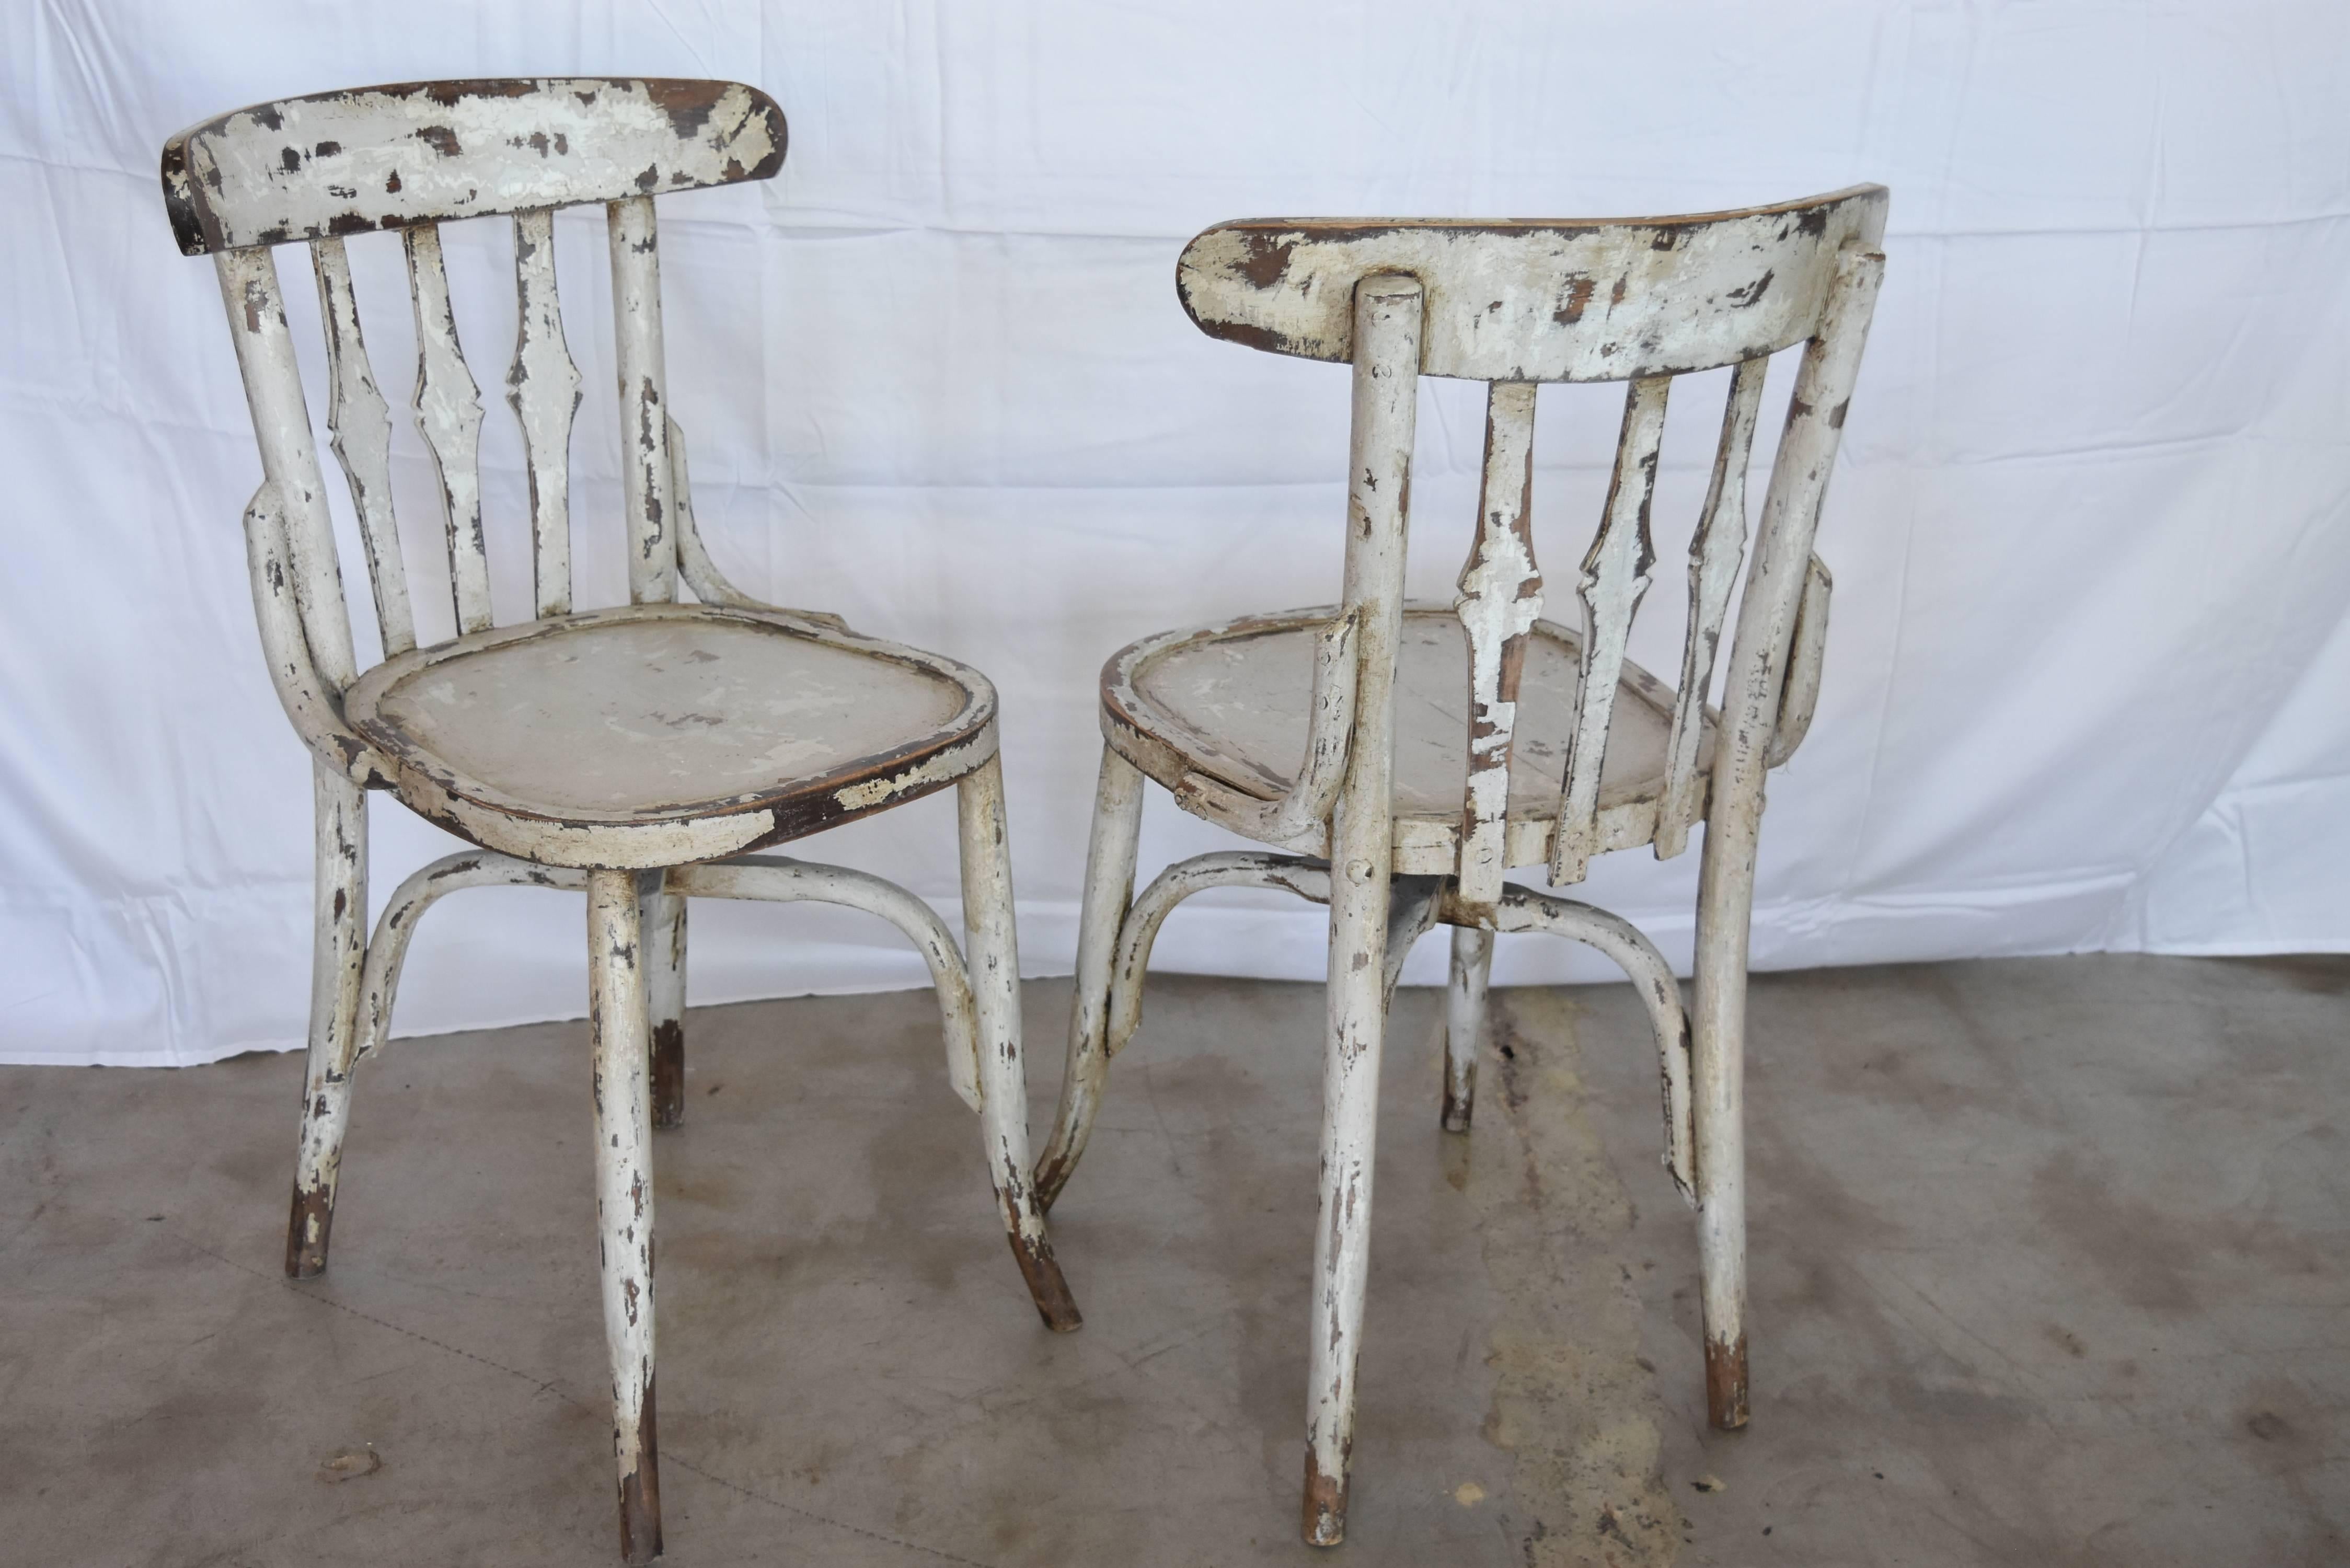 These bistro chairs from Spain are in excellent condition. They are a heavy duty wooden chair that has been hand painted with the prettiest light gray over white paint and waxed clear. I have several photos with details shown. Currently there are